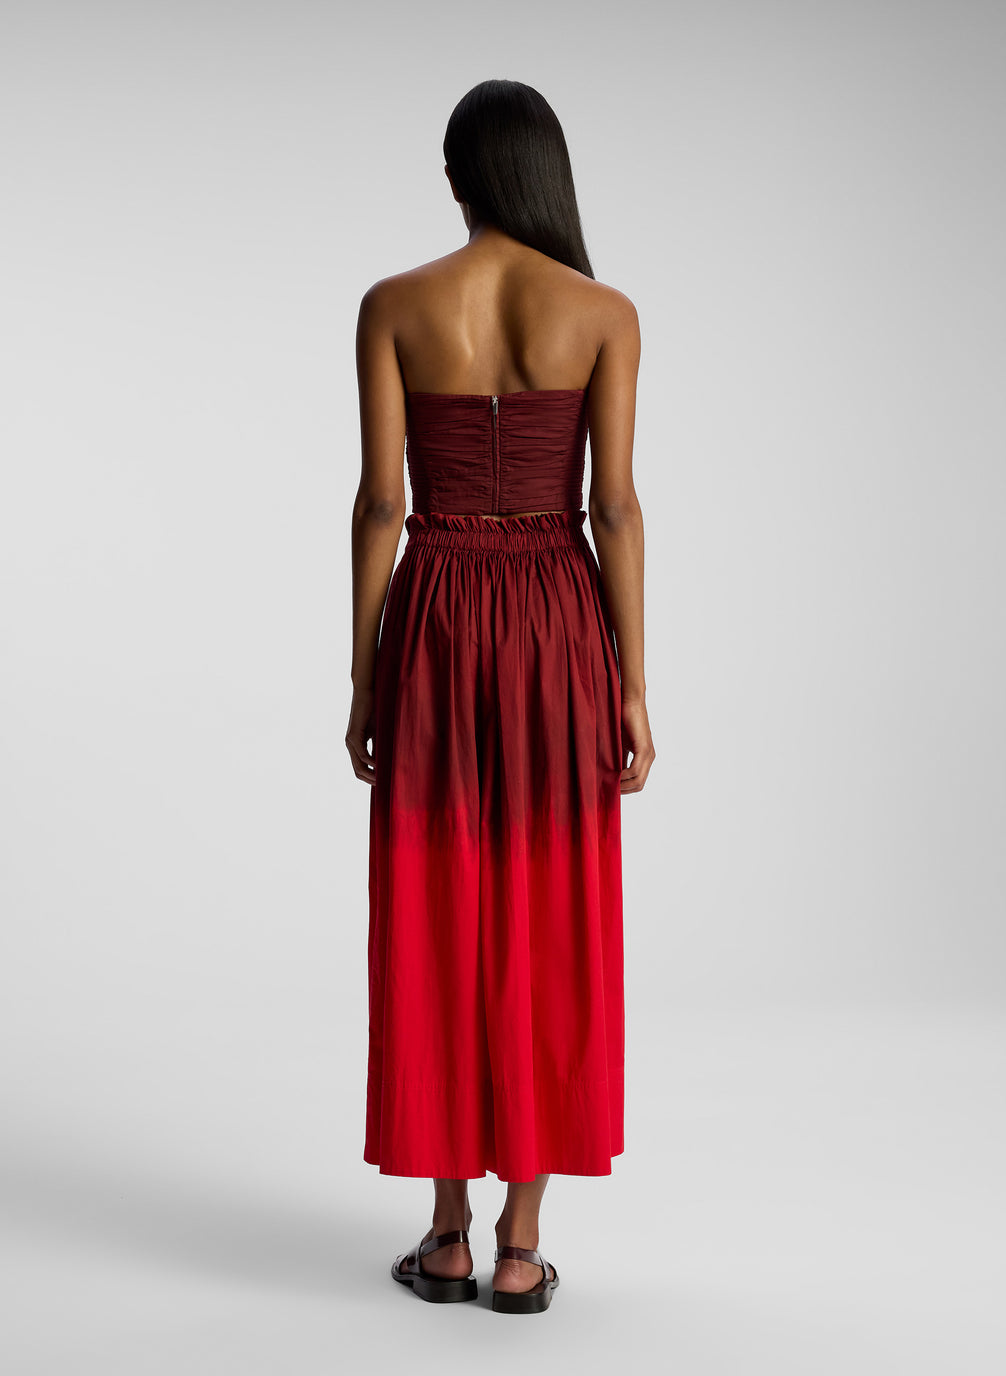 back view of woman wearing burgundy and red ombre top and skirt